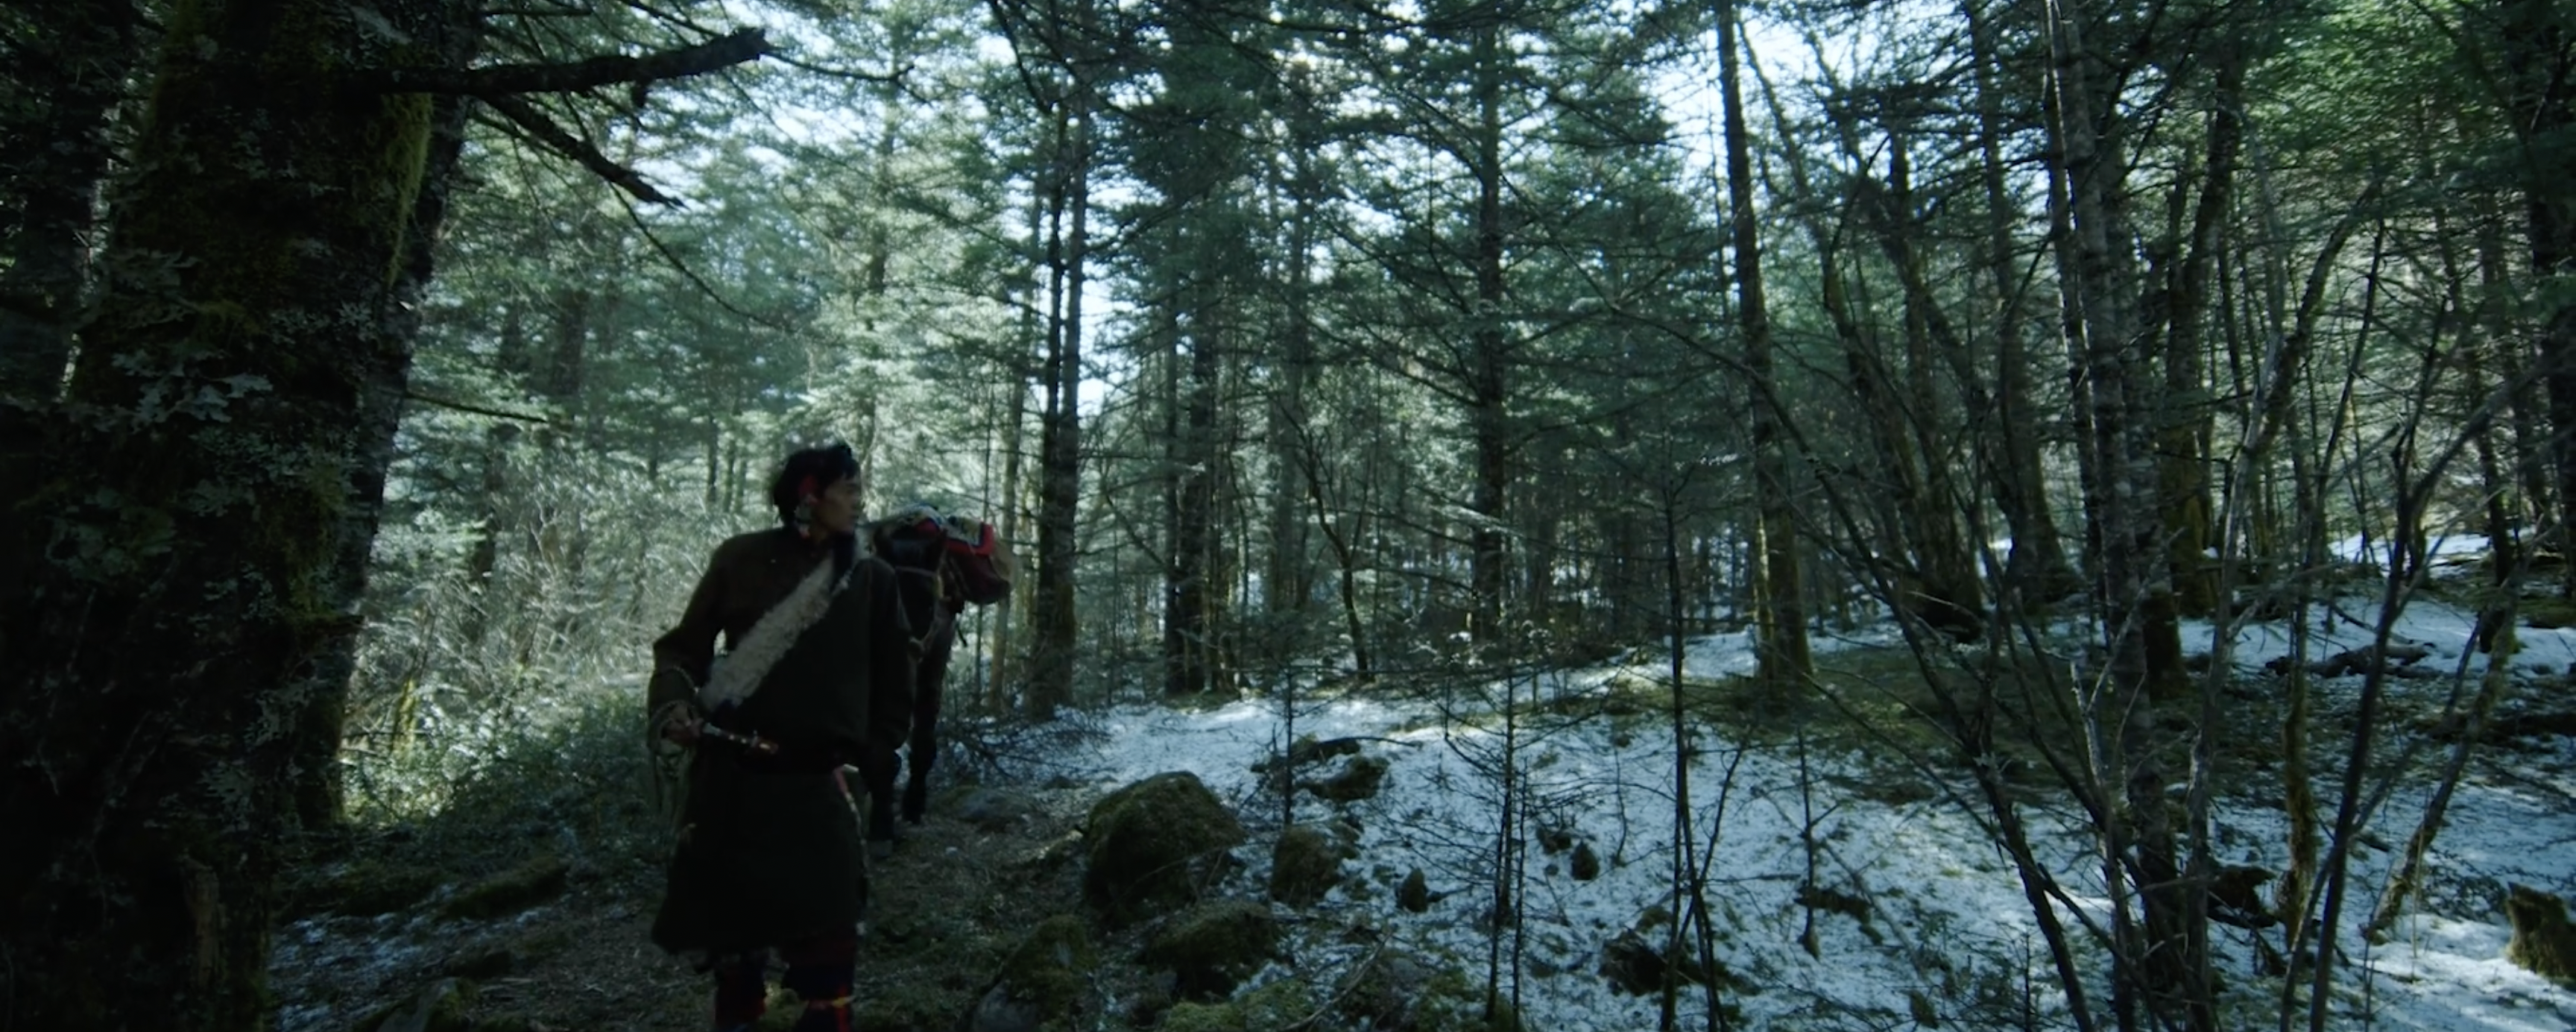 Still from Lamu's film shows a hunter walking in the woods with a horse behind them.